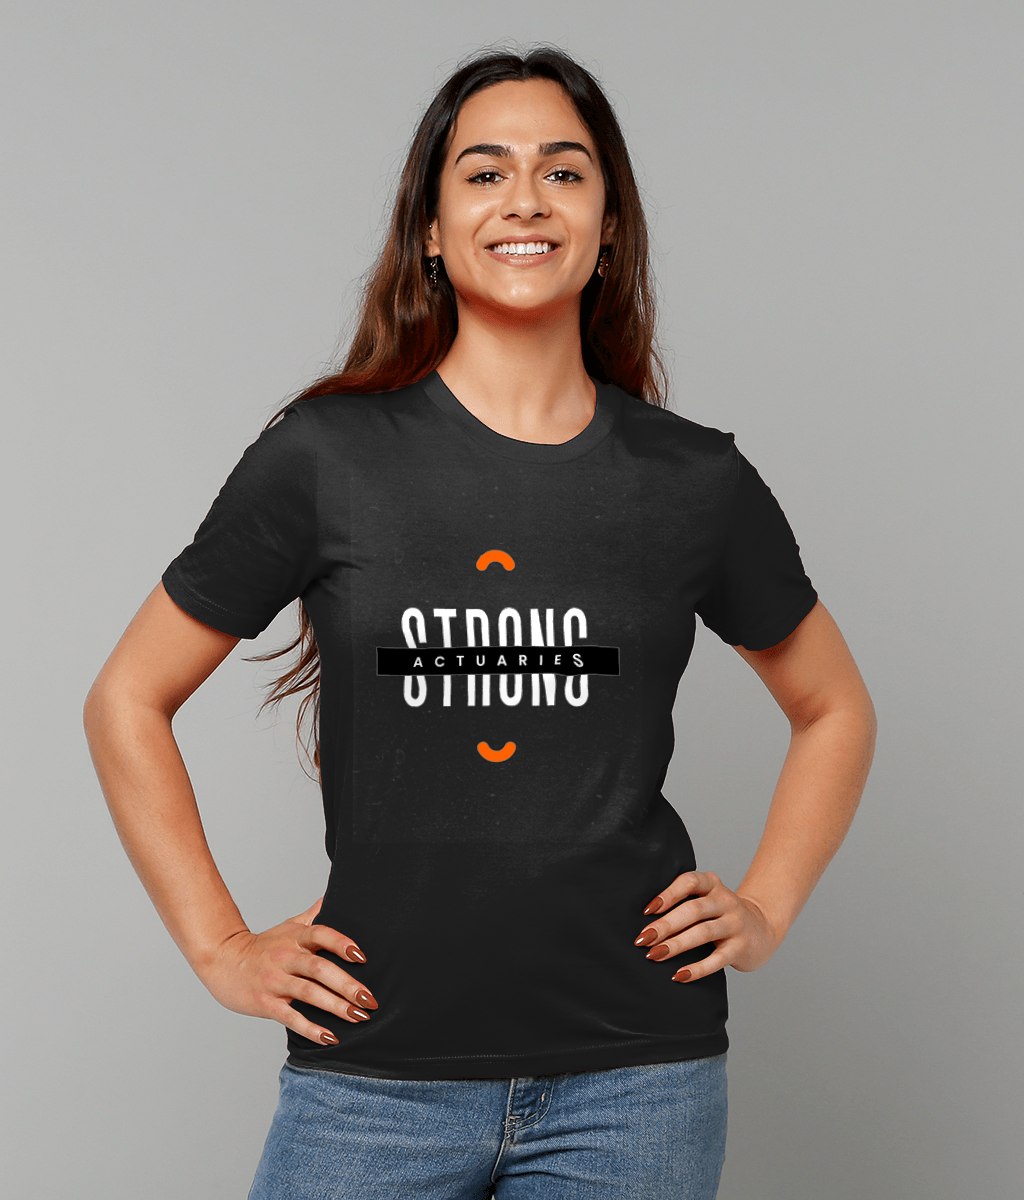 Actuaries Strong Black and White Texture Typography Black T-Shirt